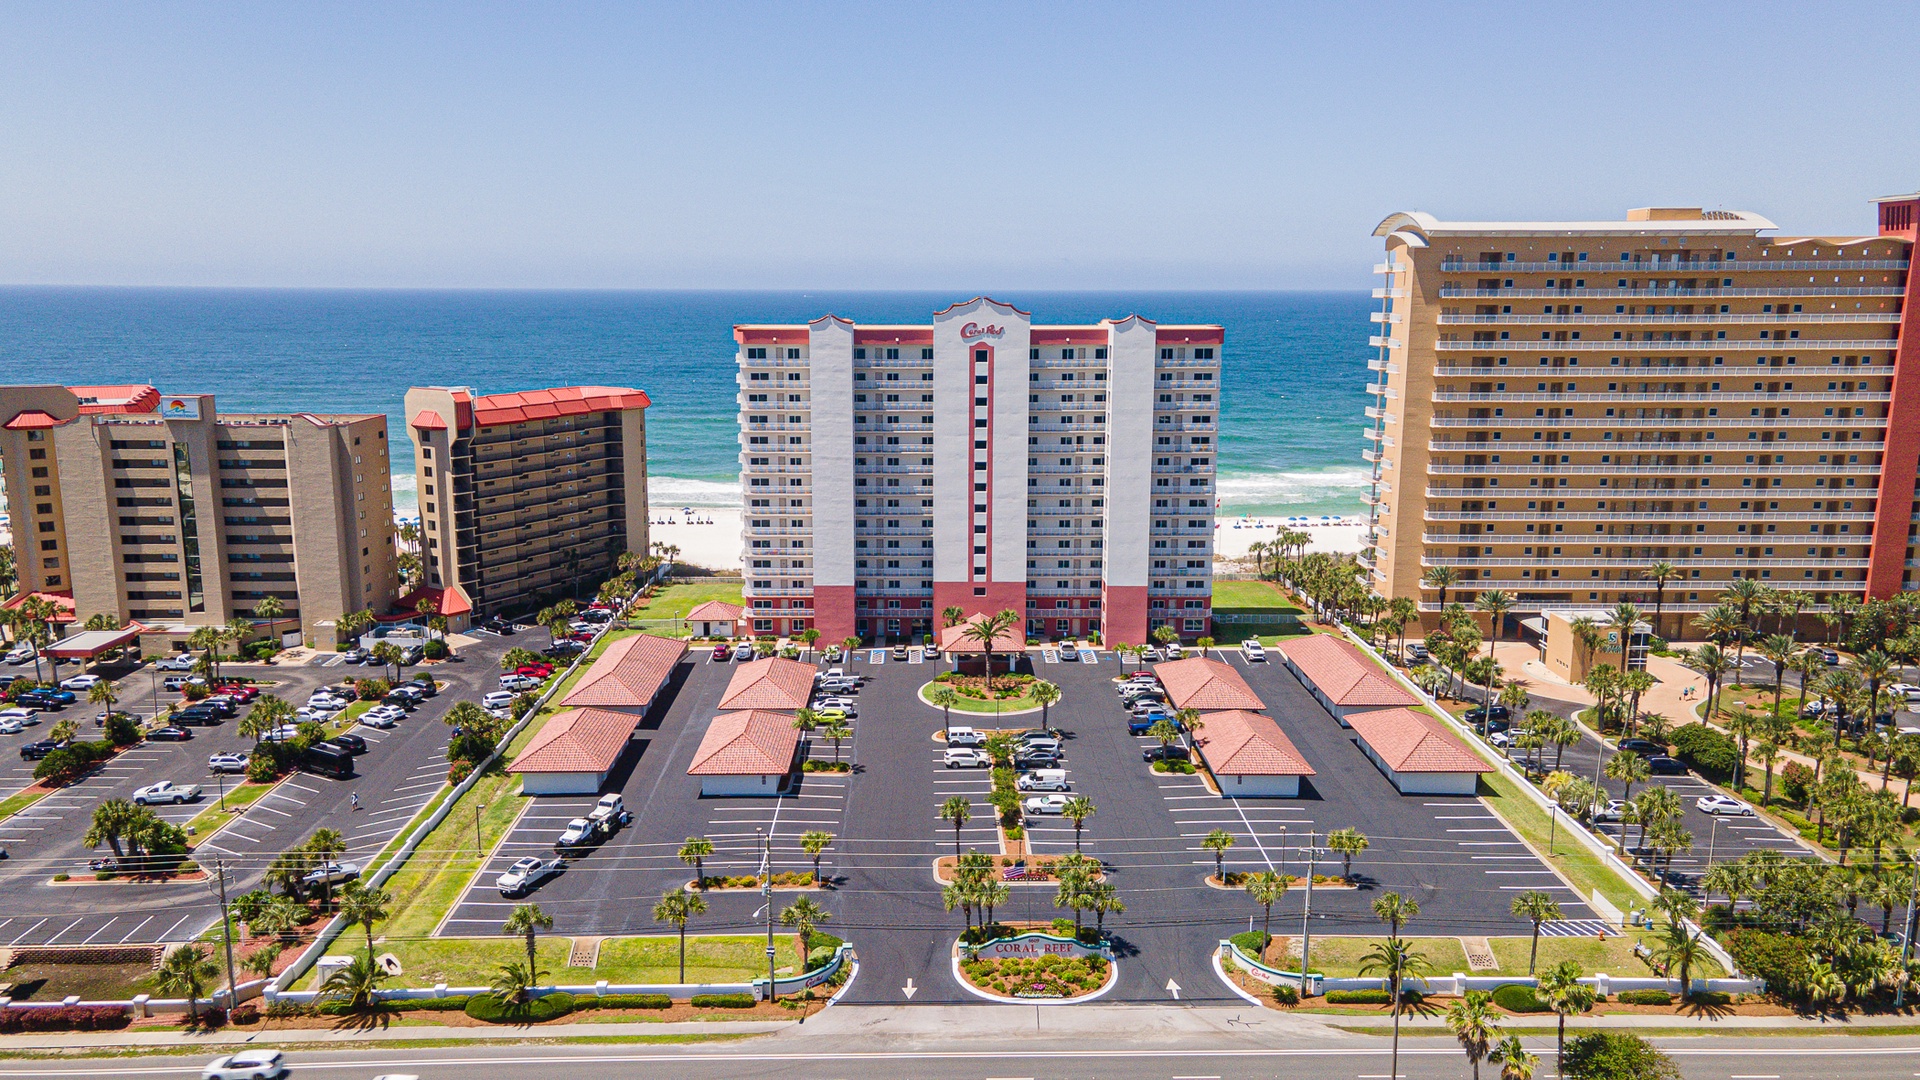 Enjoy your stay at the Coral Reef resort community!